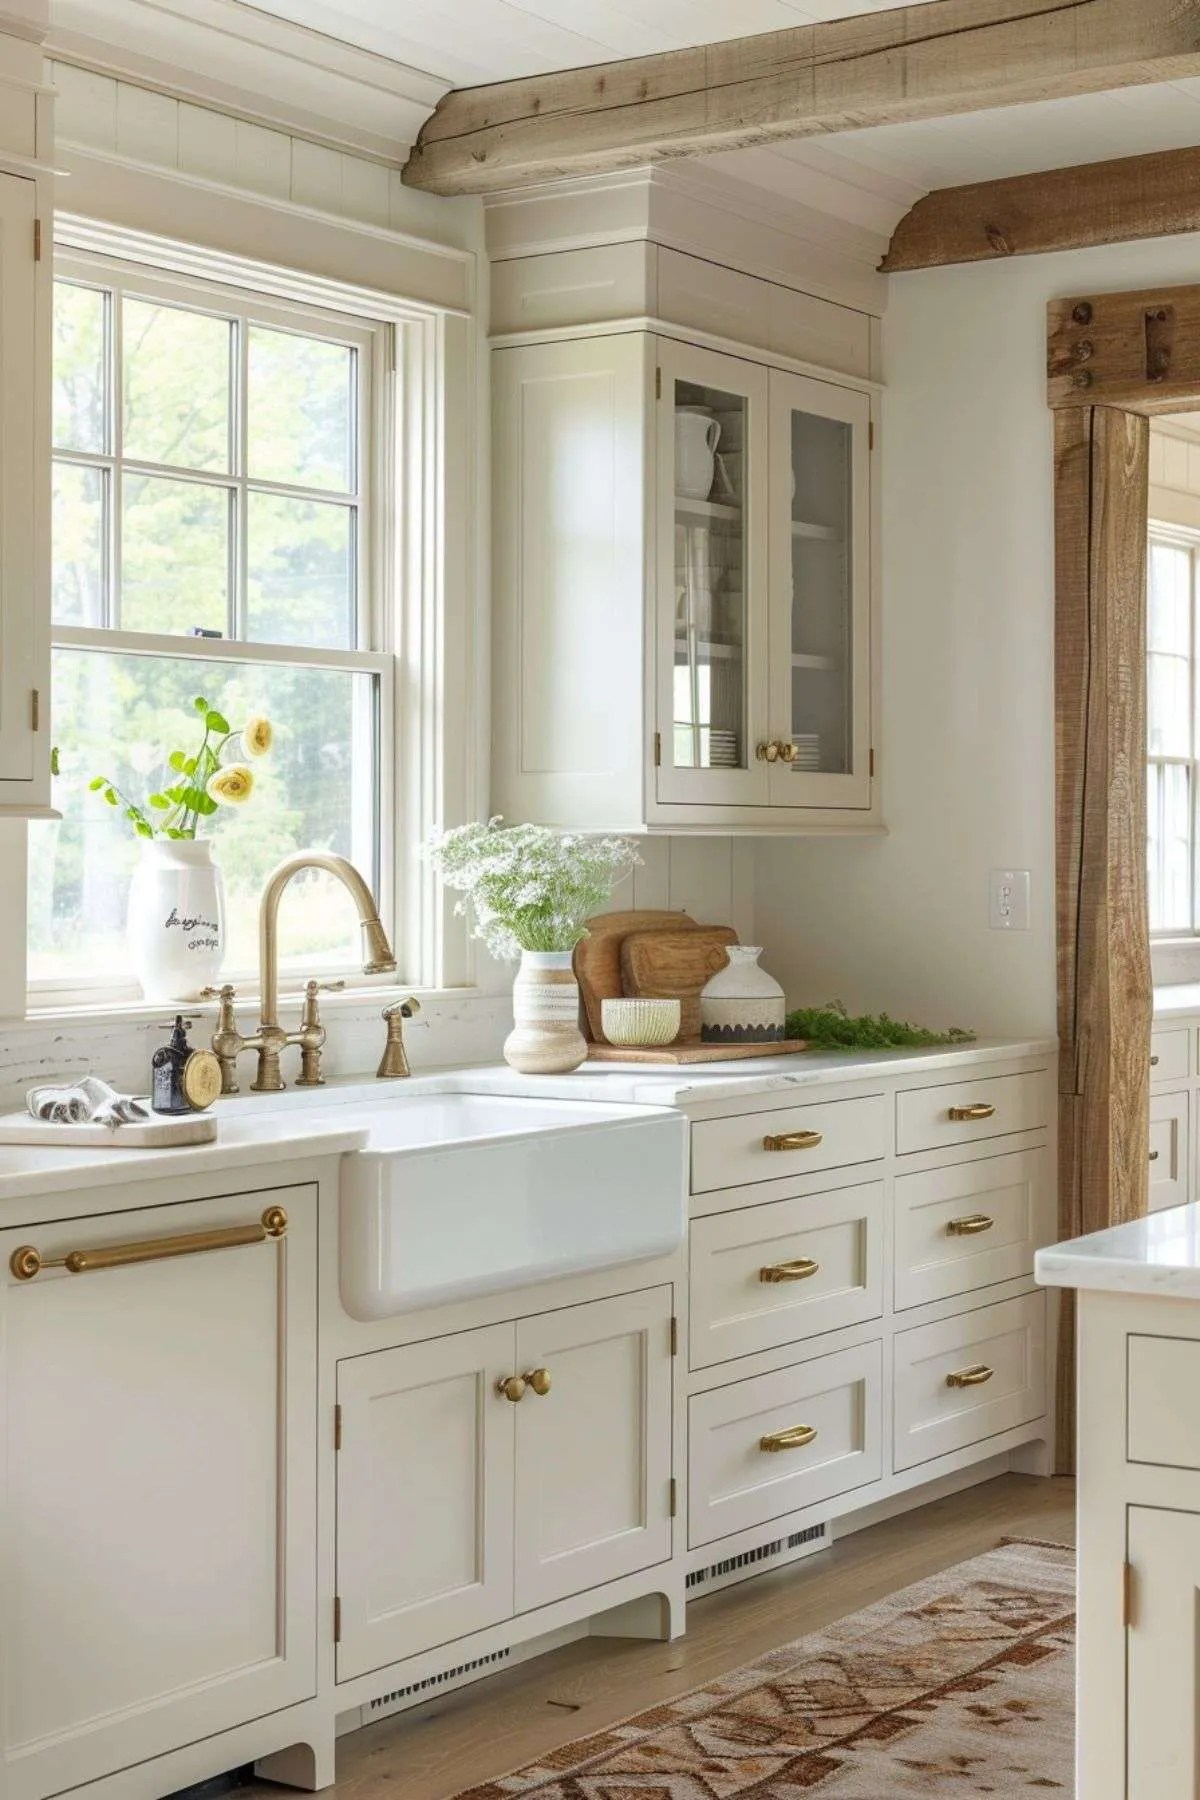 Selecting Cabinet Hardware – Tips for a Cohesive Look